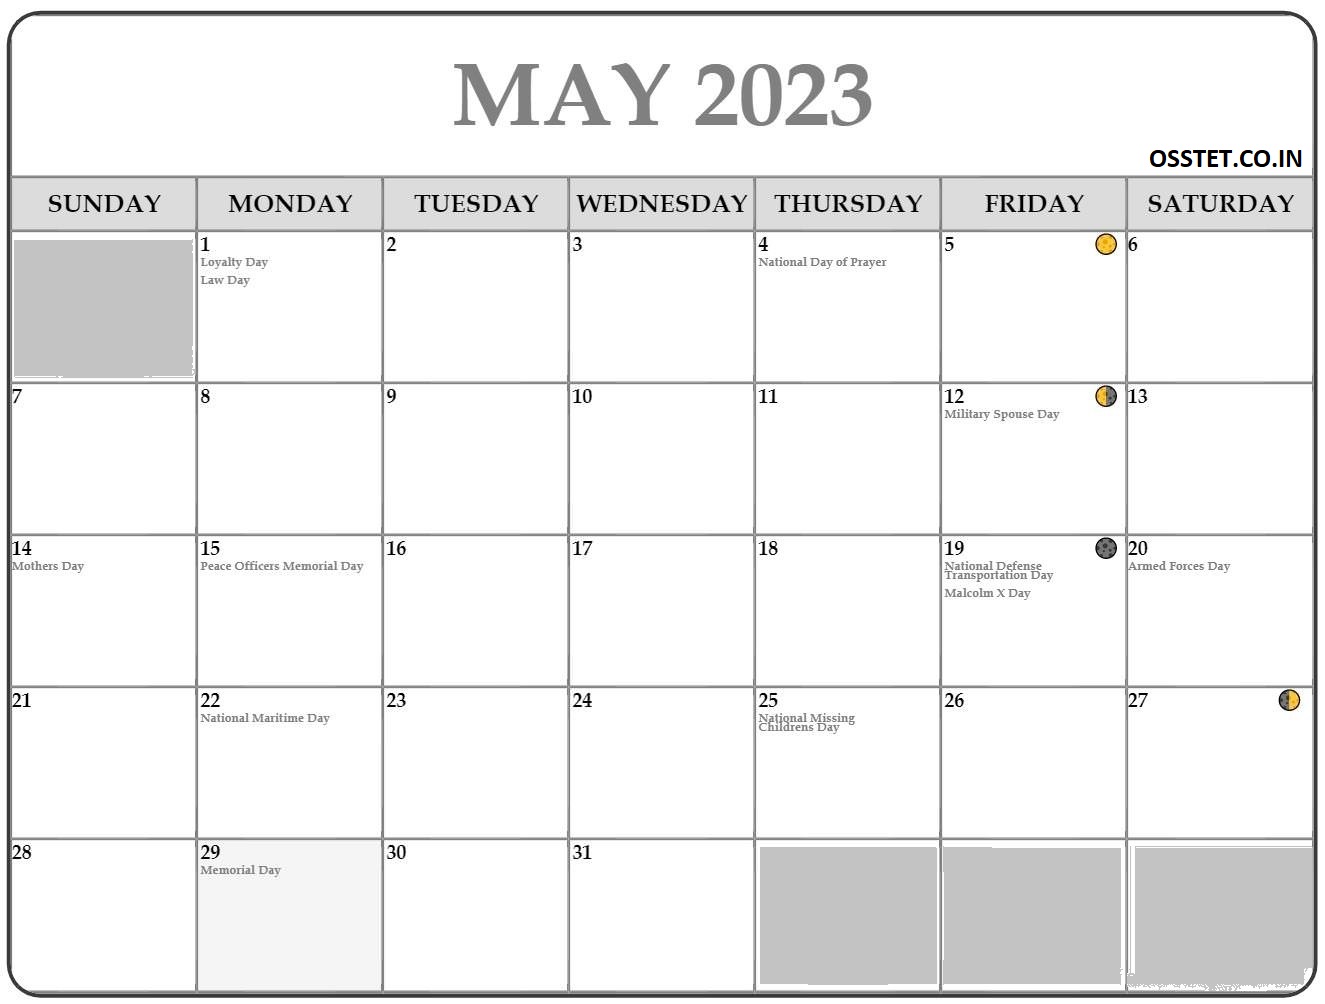 May 2023 full moon and new moon dates